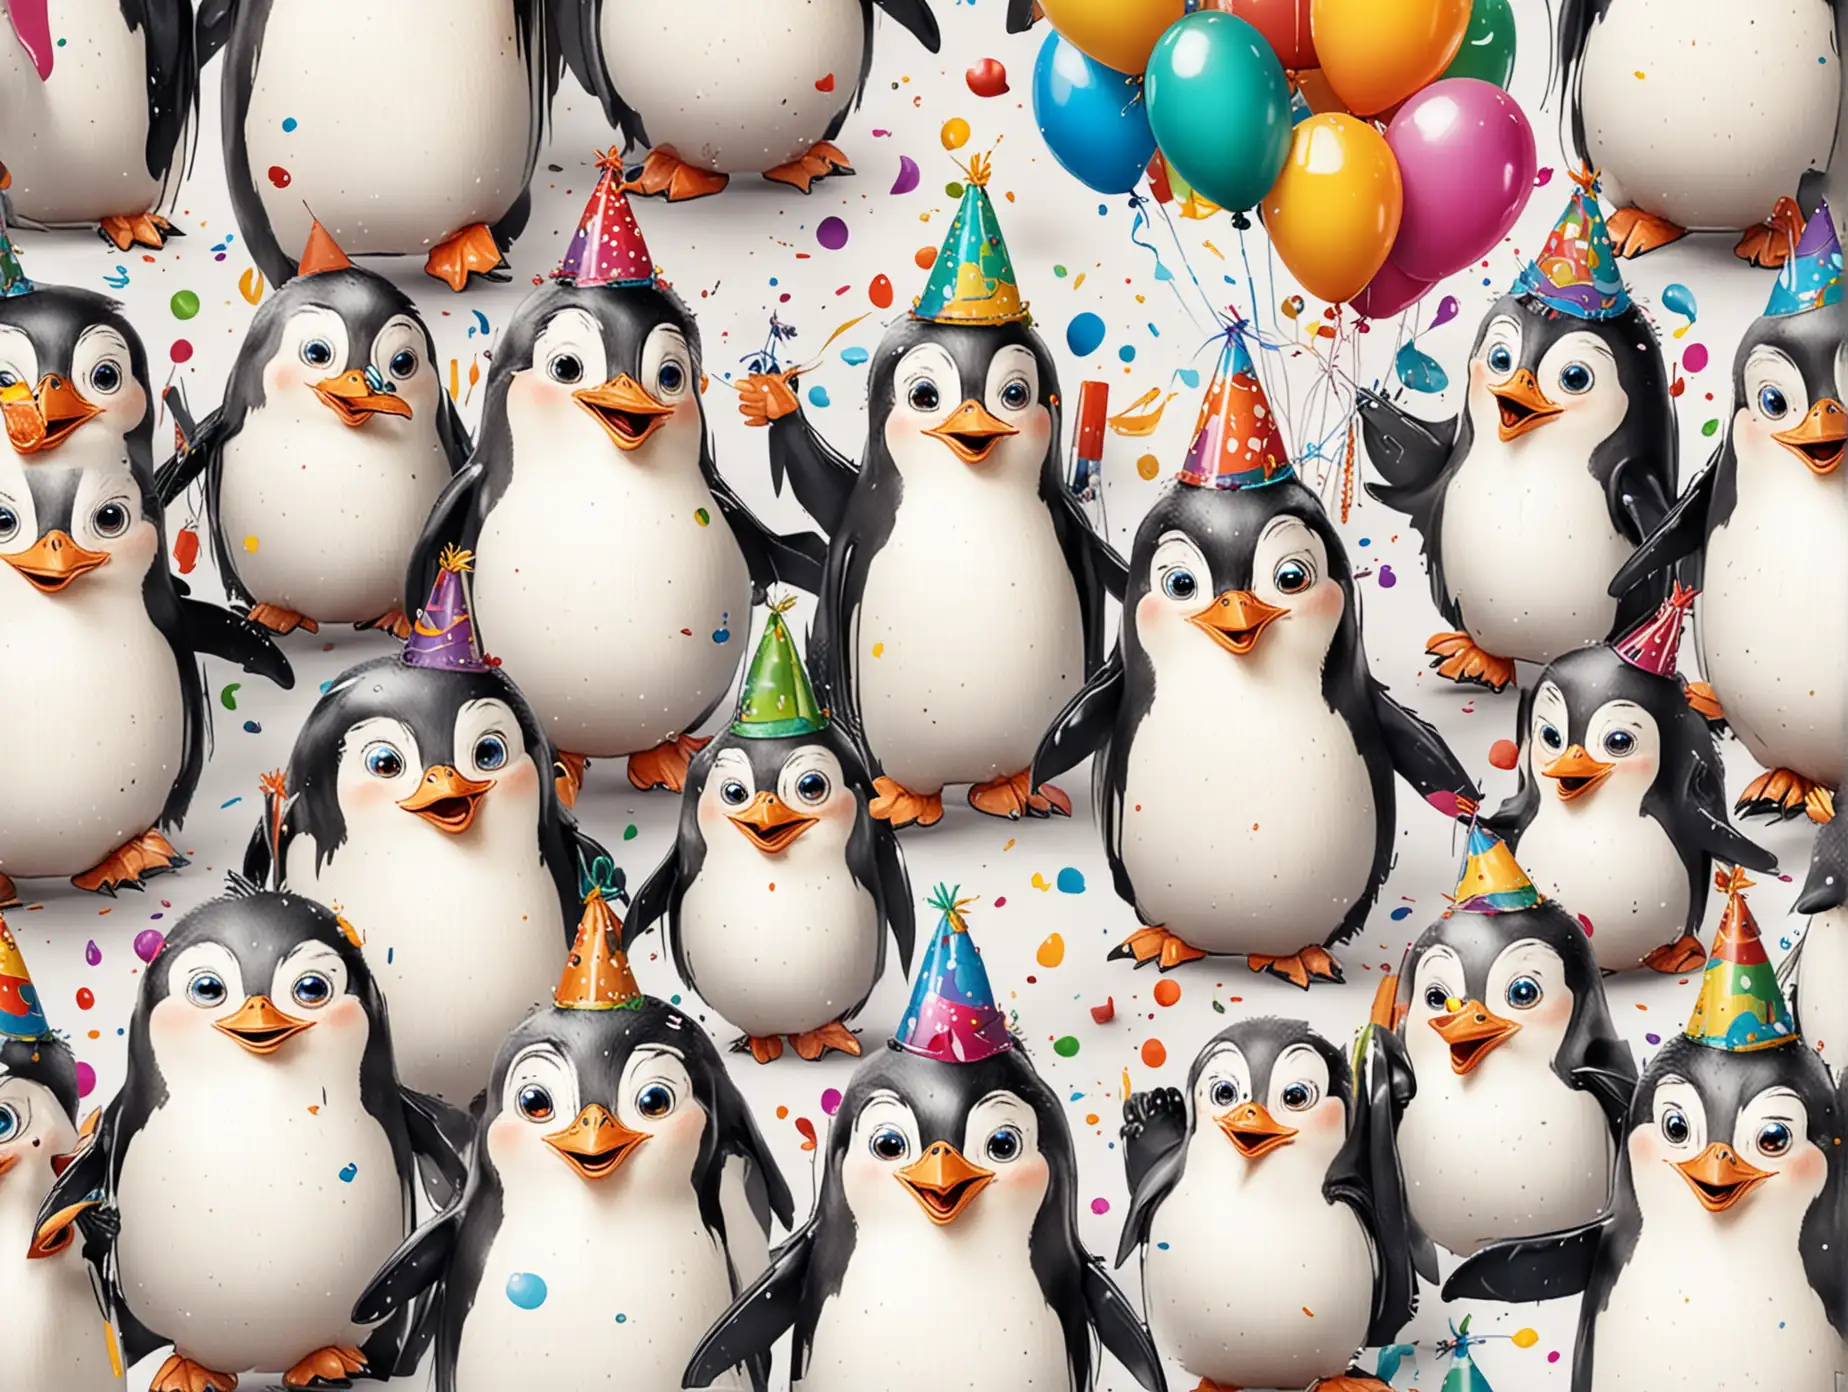 Colorful Cartoon Penguins Celebrating at a Birthday Party on White Background